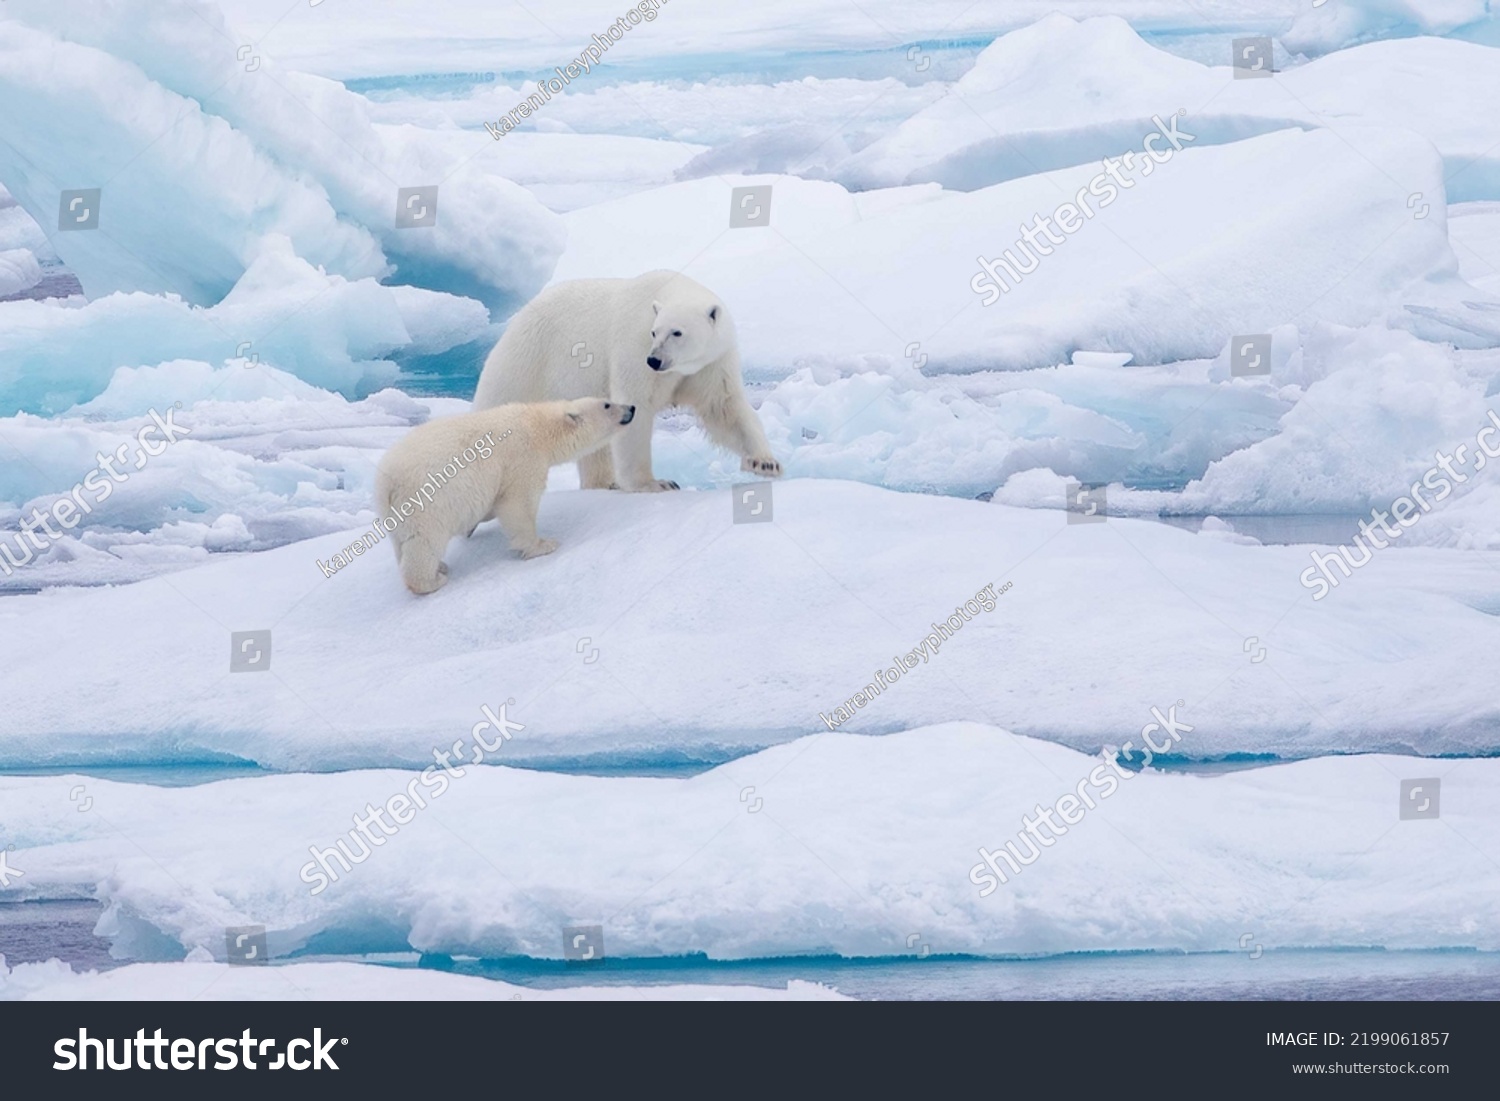 Polar bear mother with young cub on ice in the Viscount Melville Sound, Nunavut, Canada high arctic polar region. #2199061857